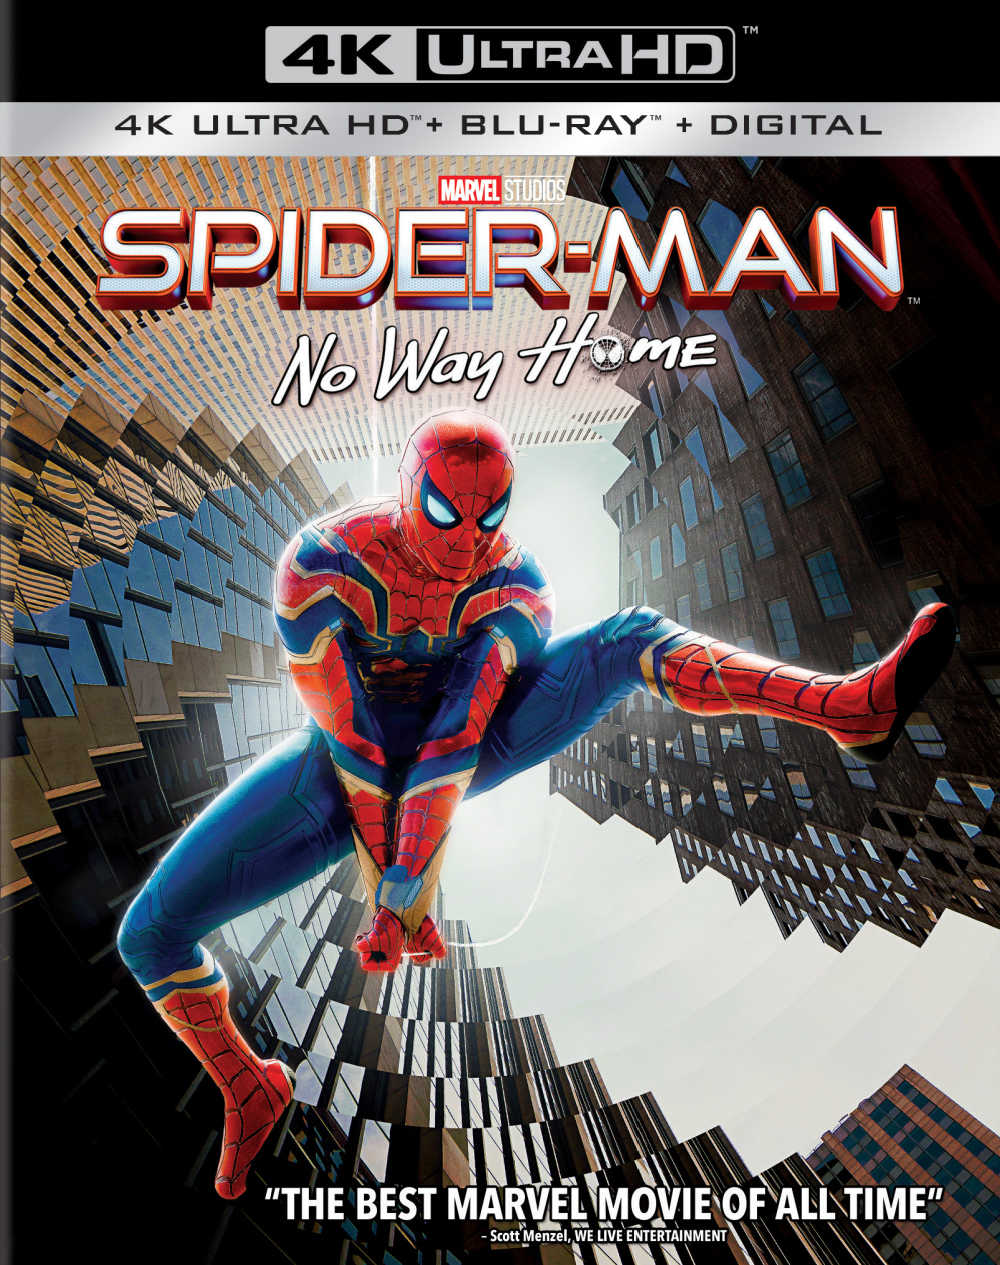 Marvel fans are definitely going to want to add the action-packed Spider-Man No Way Home to their movie collection.